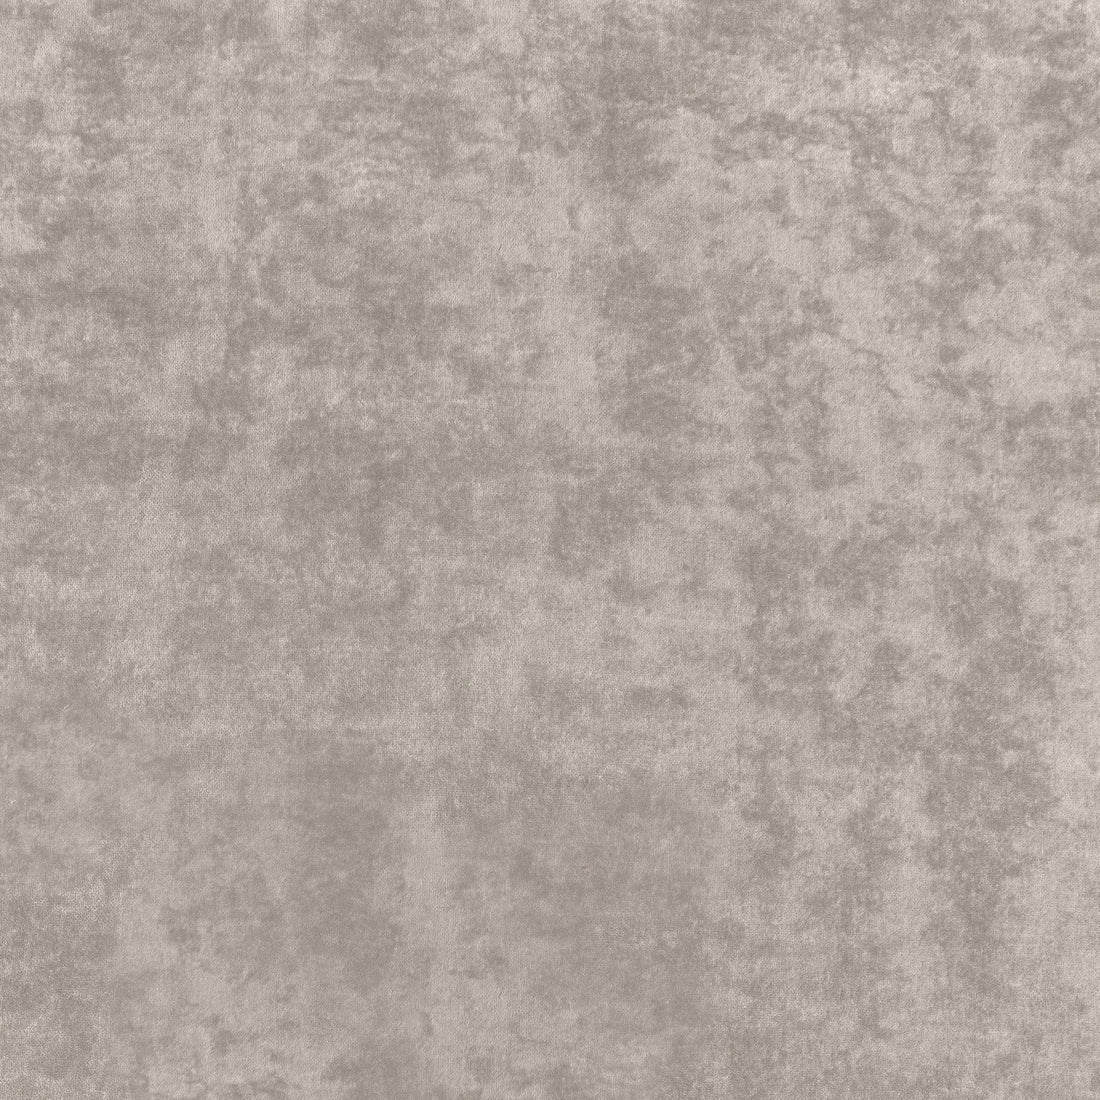 Celeste Velvet fabric in smoke color - pattern number W8971 - by Thibaut in the Lyra Velvets collection